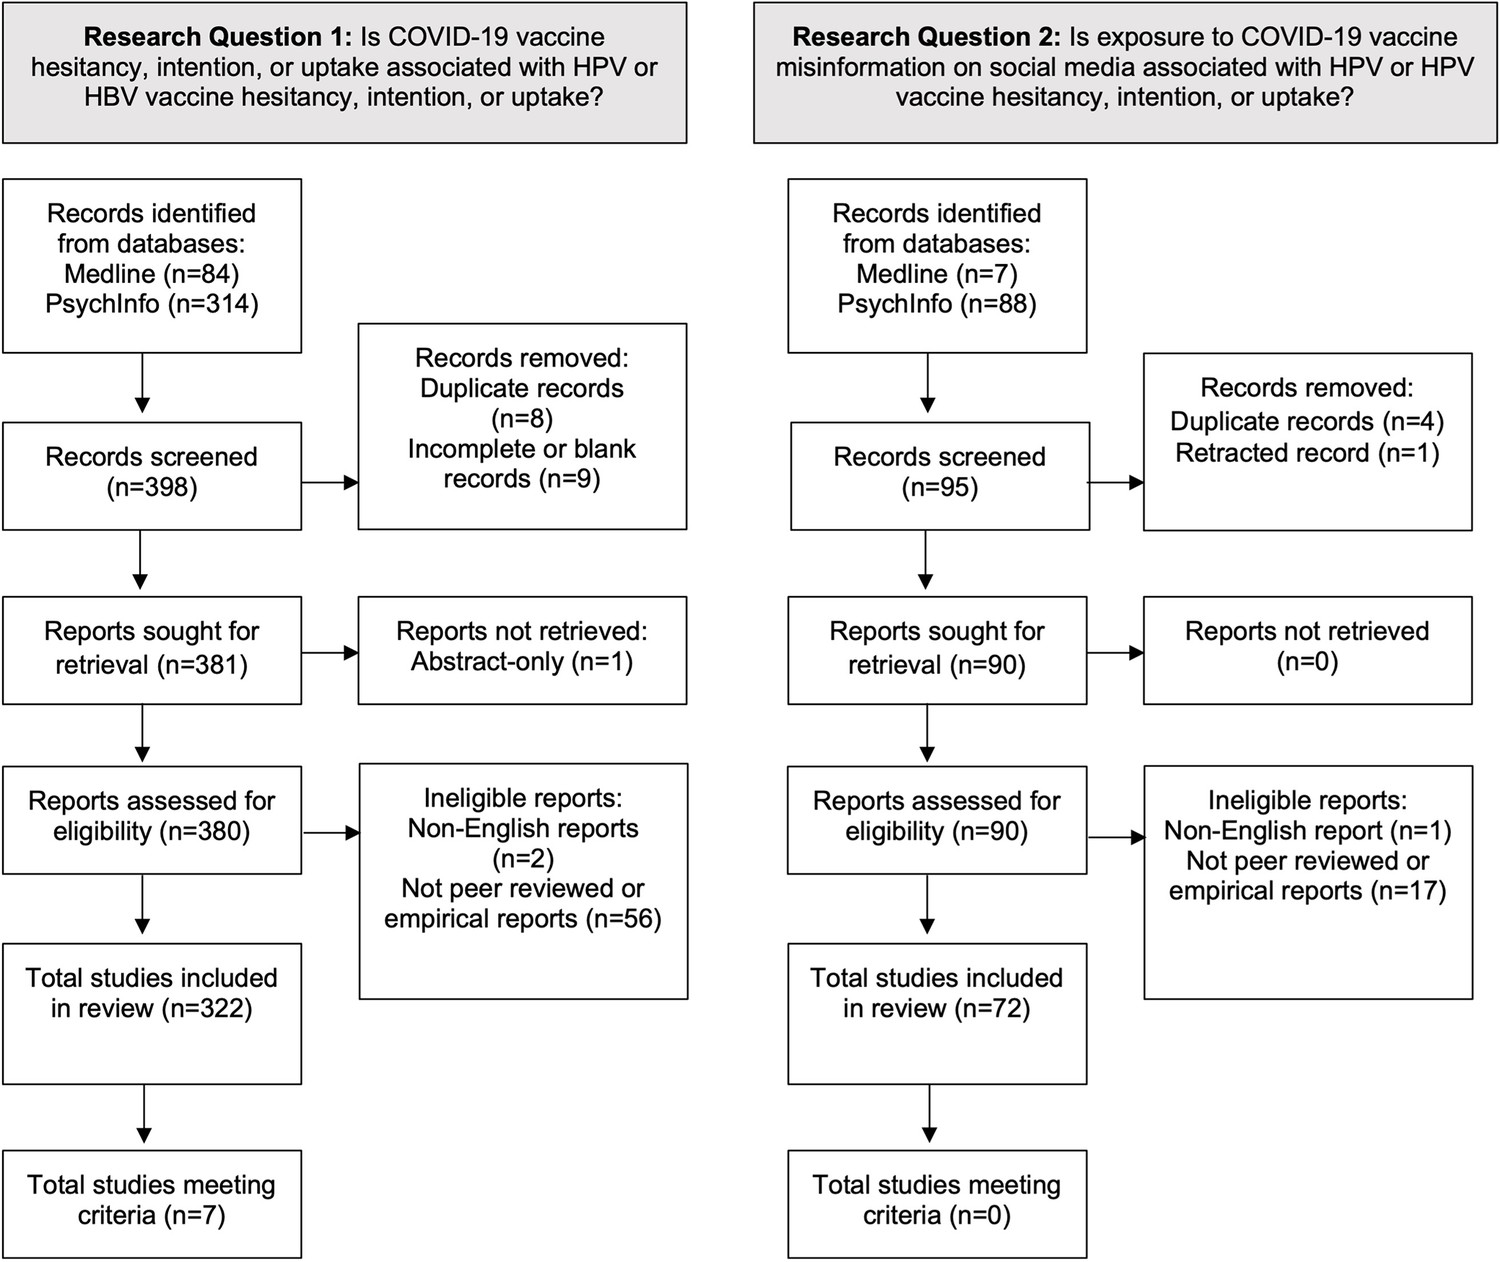 A review of HPV and HBV vaccine hesitancy, intention, and uptake